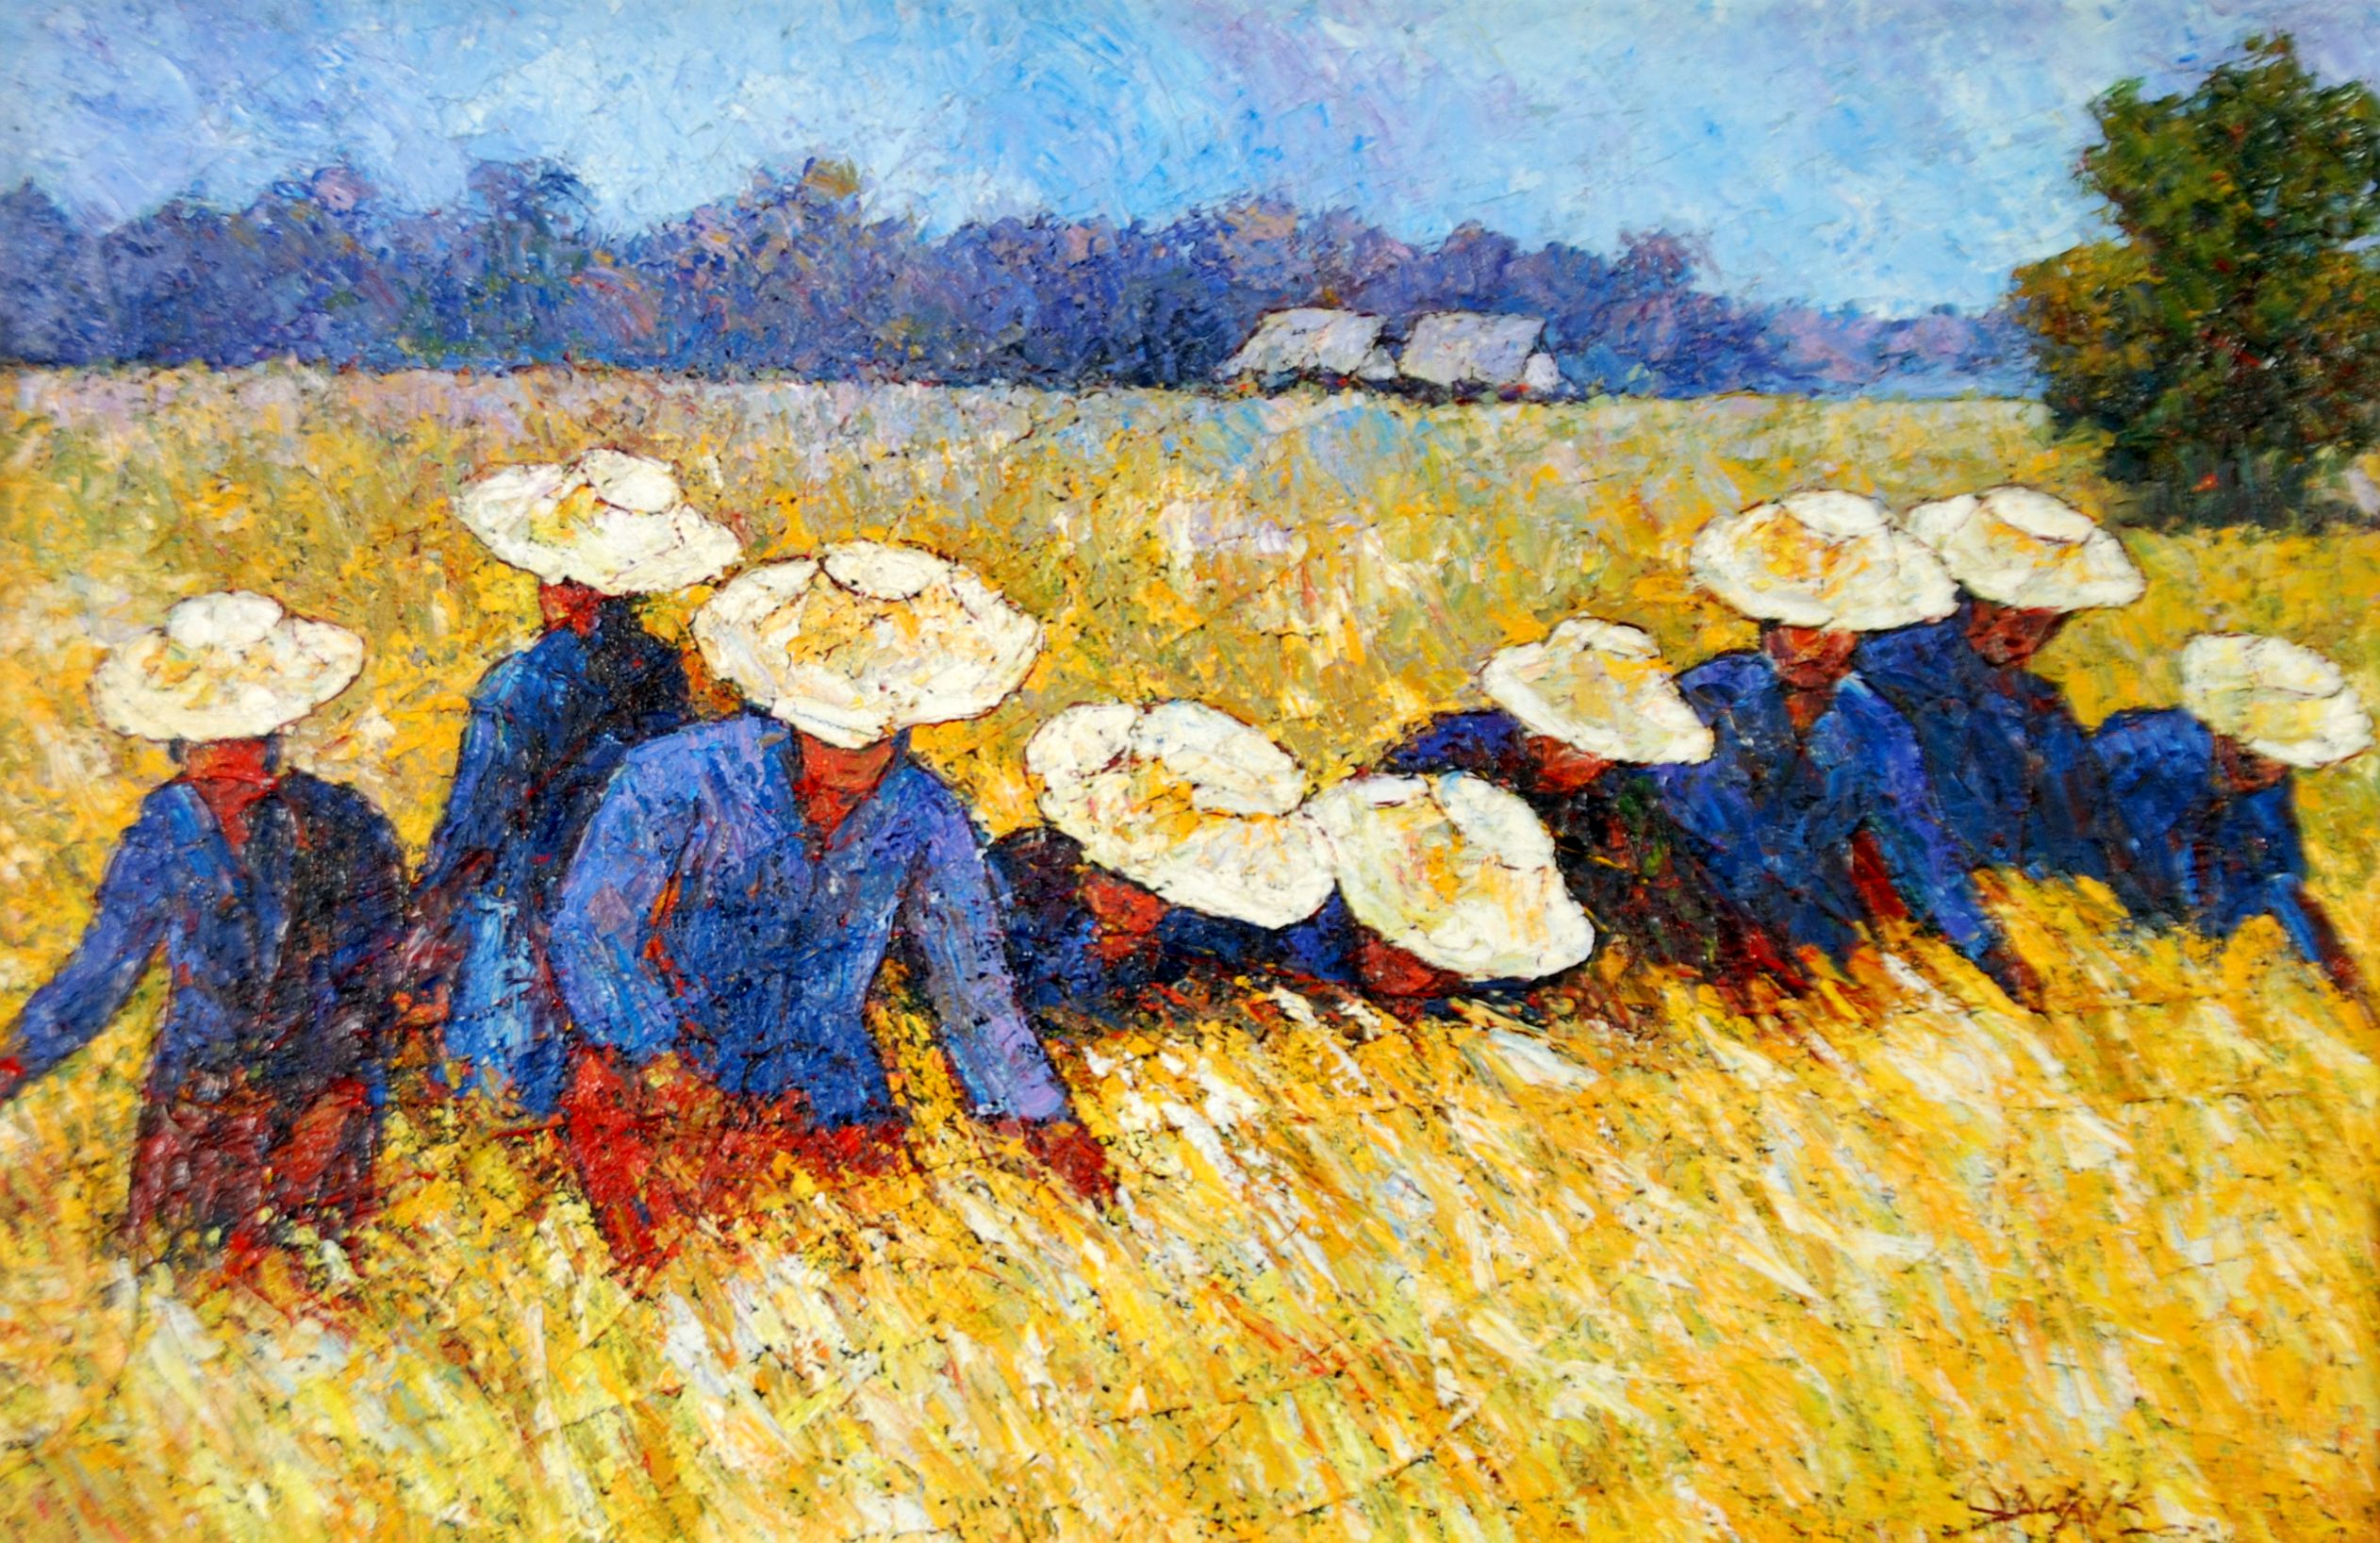 LAGANA ? (Twentieth Century) IMPASTO OIL PAINTING ON CANVAS A row of field workers in wide brimmed